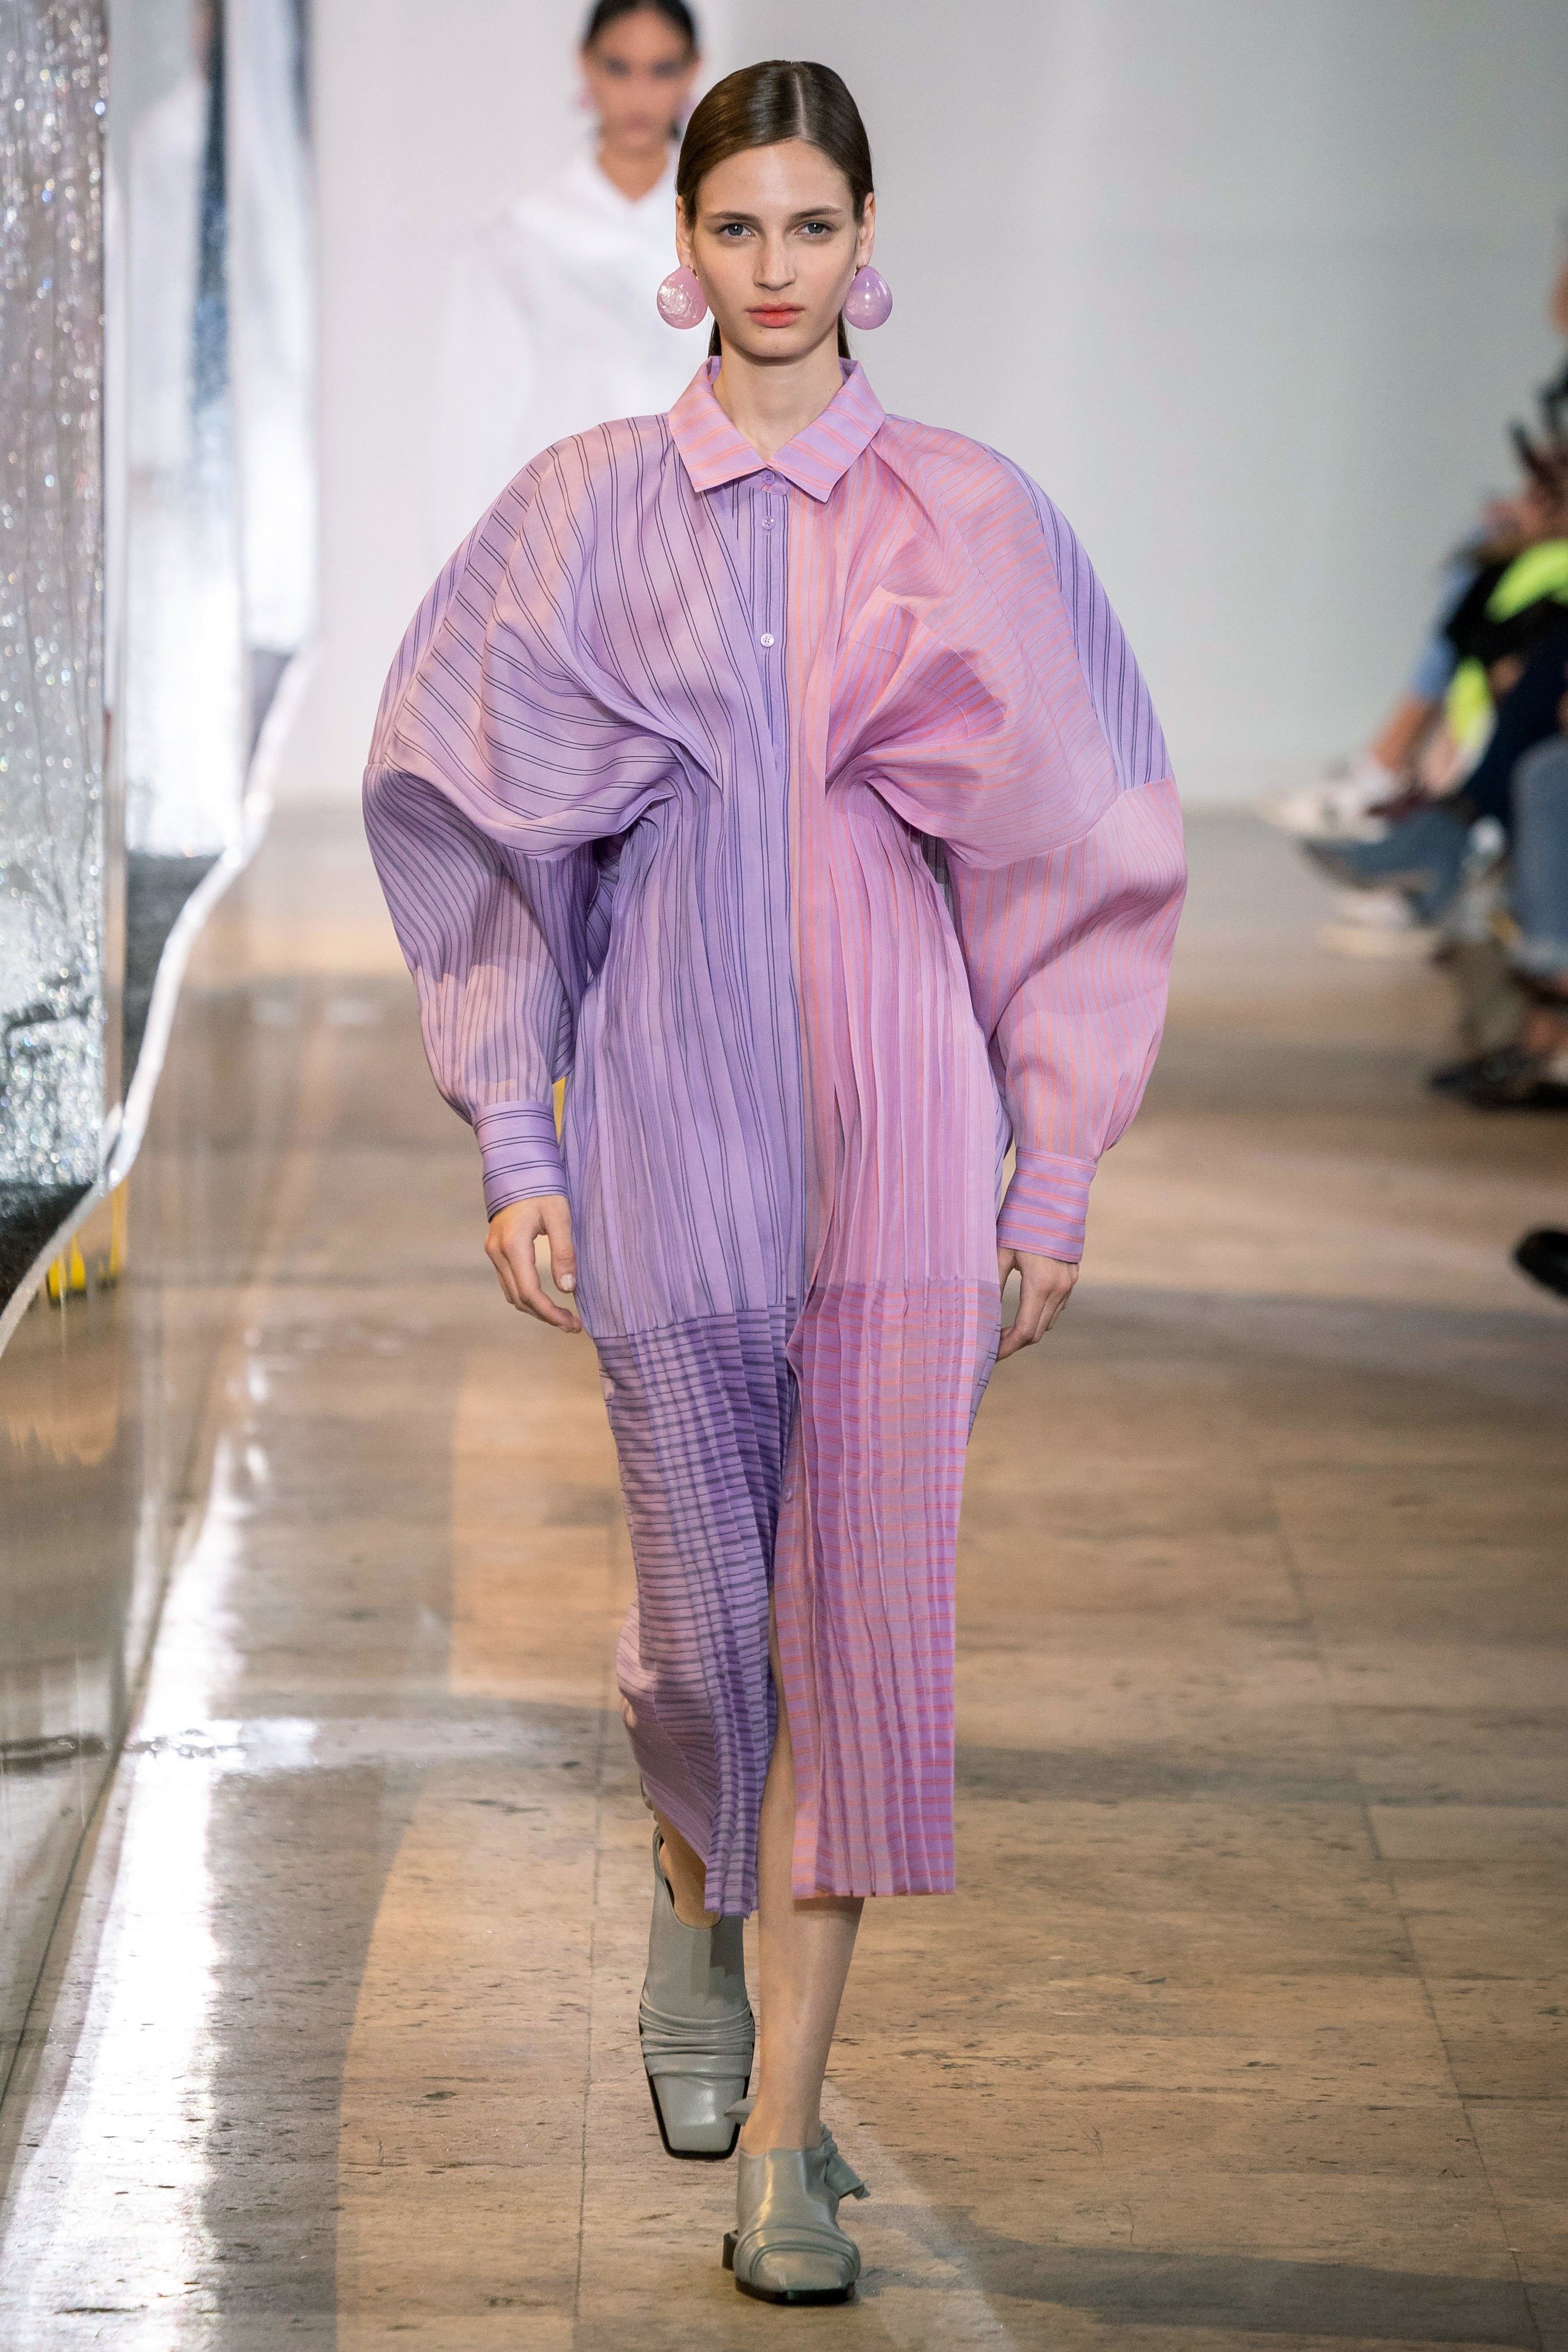 Nina Ricci Spring Summer 2020 SS2020 trends runway coverage Ready To Wear Vogue double trouble